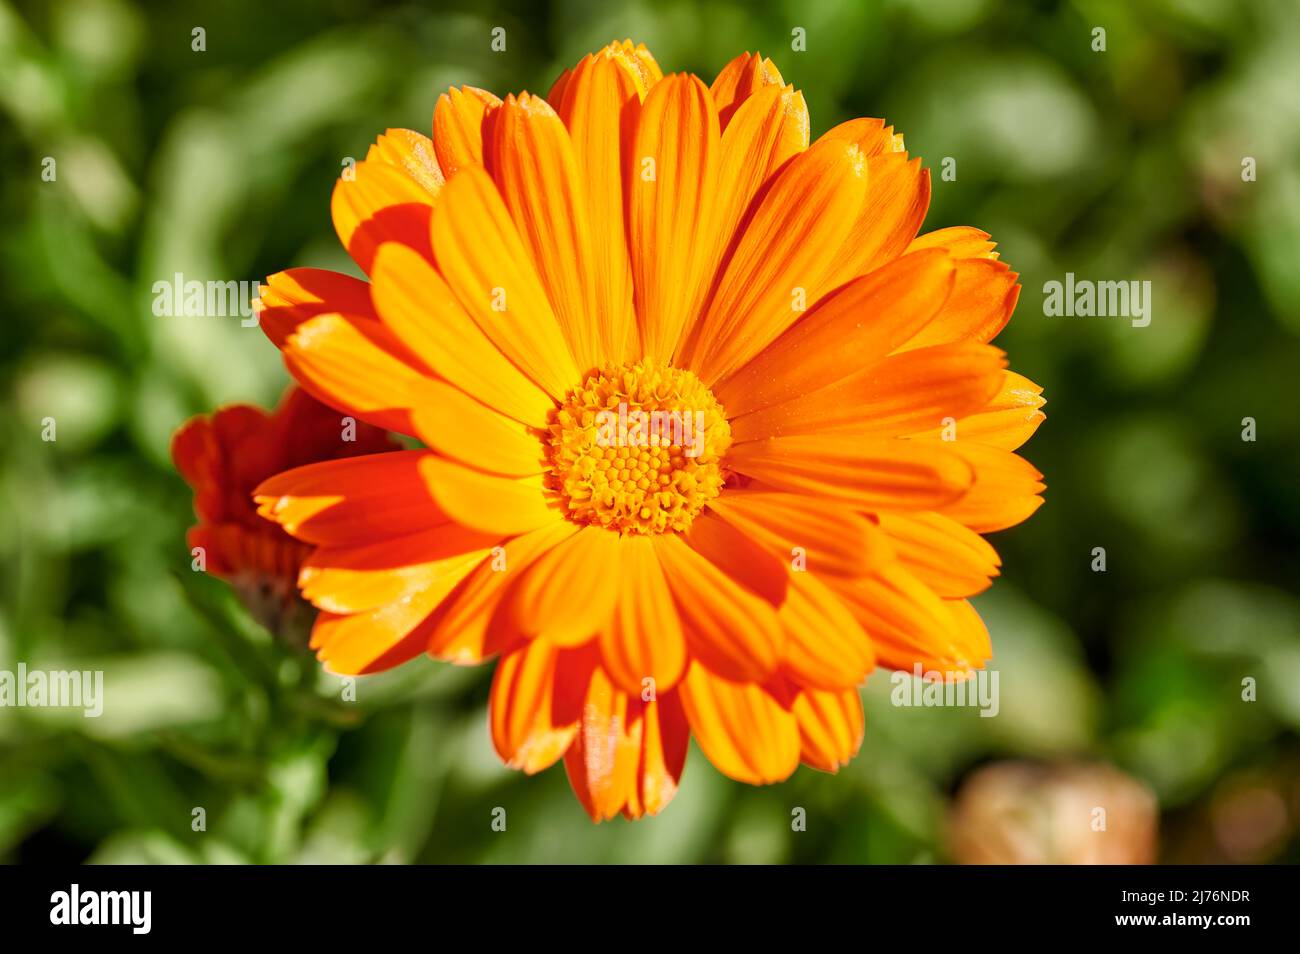 Close up of an orange flower of Calendula (Calendula officinalis), buttercup or marigold, herb of the Asteraceae family, with green leaves, focused on Stock Photo